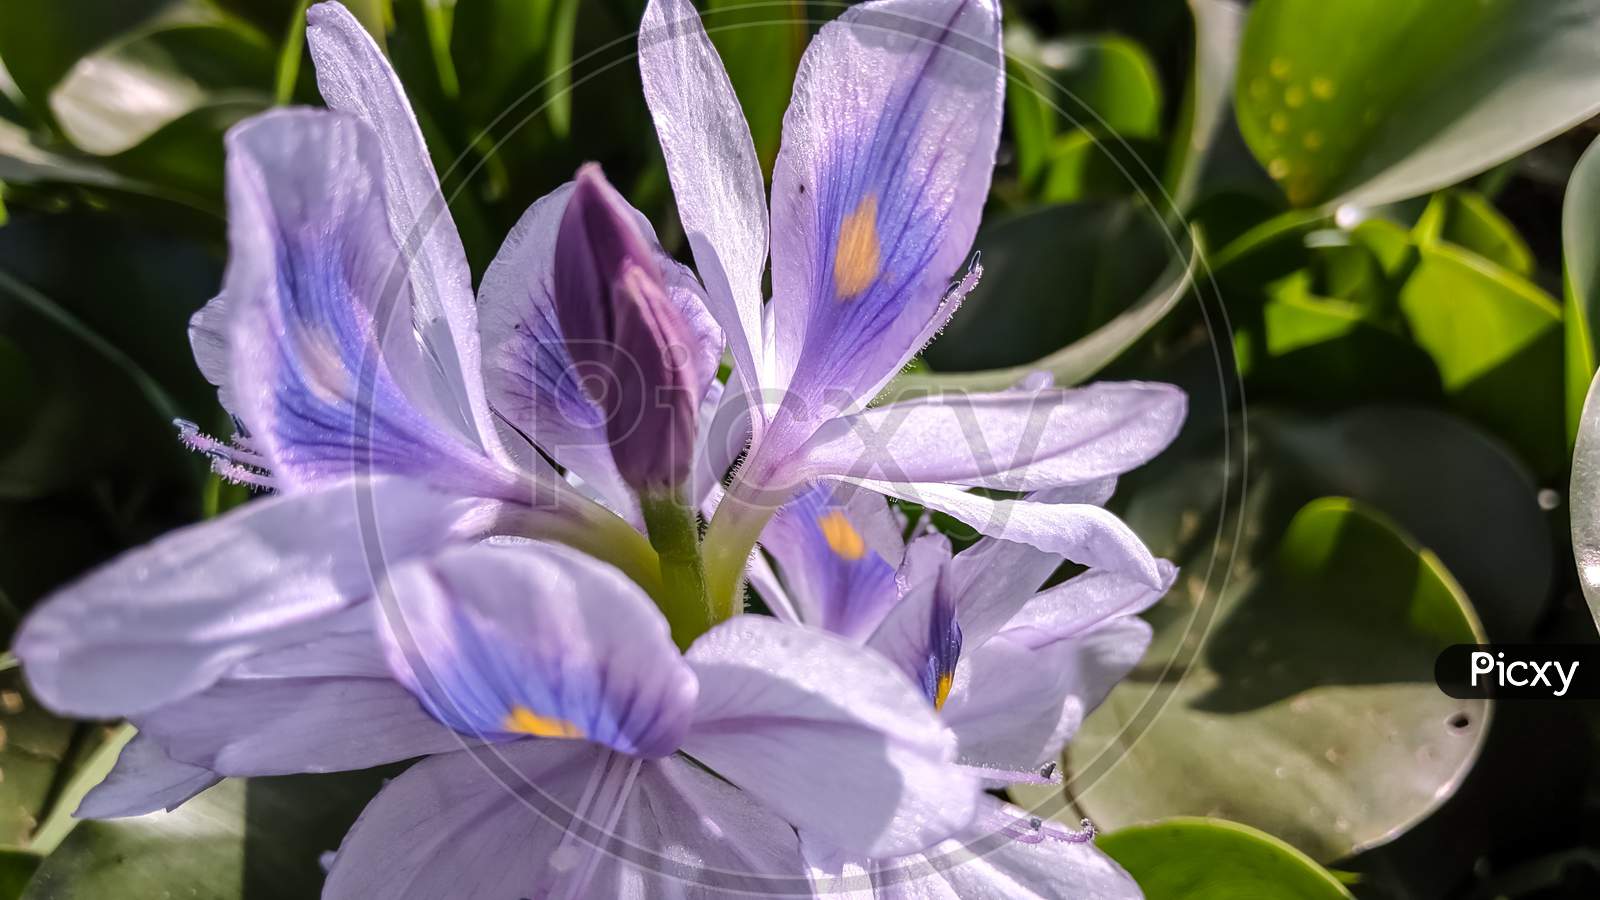 Common water hyacinth flower